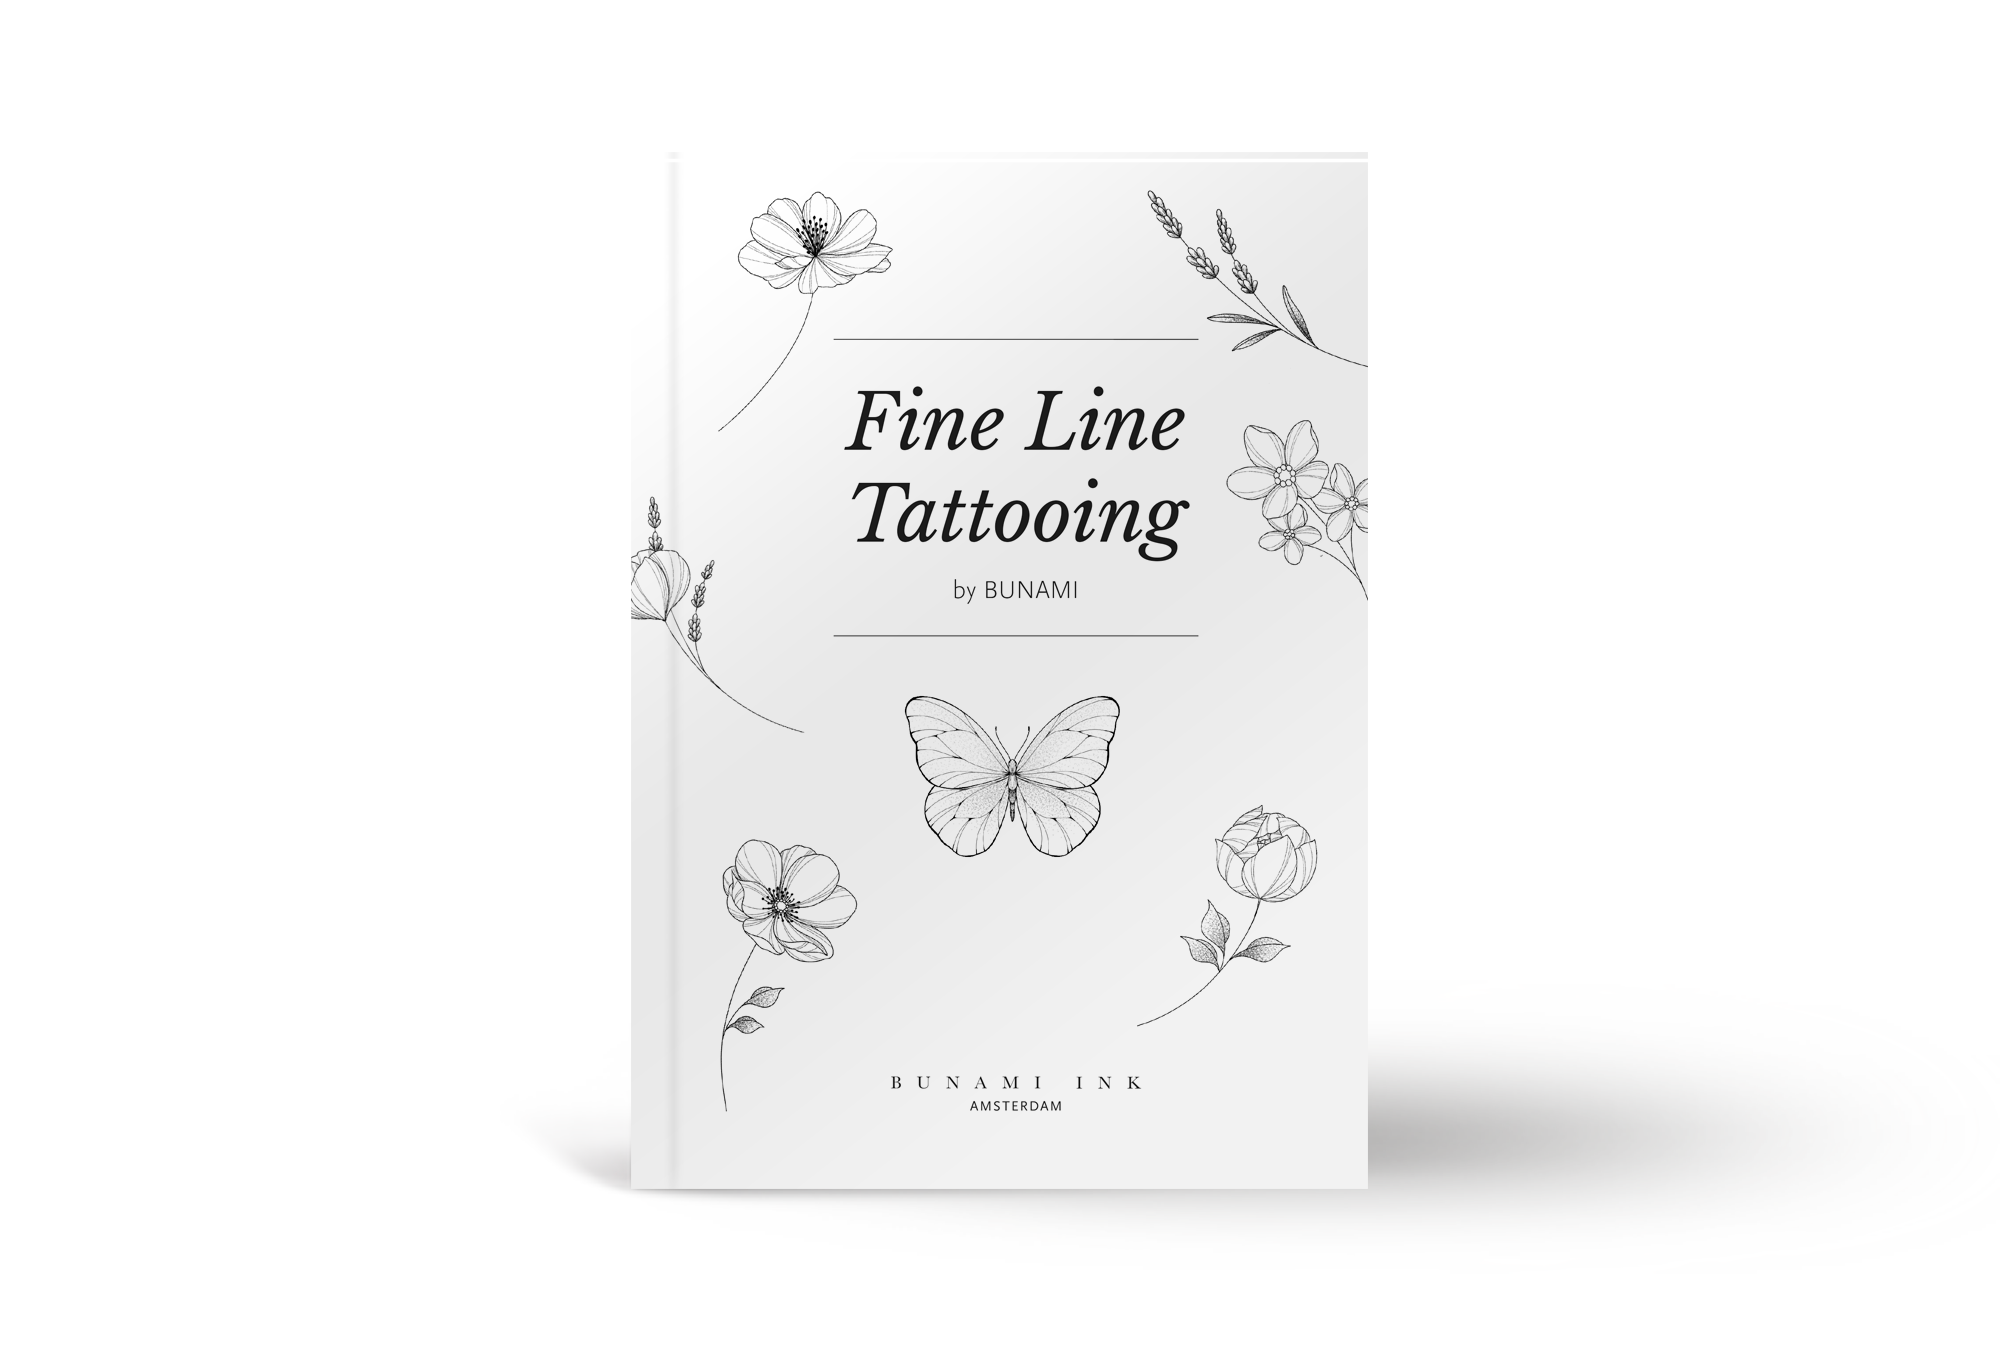 Fine Line Tattooing by Bunami (Book)